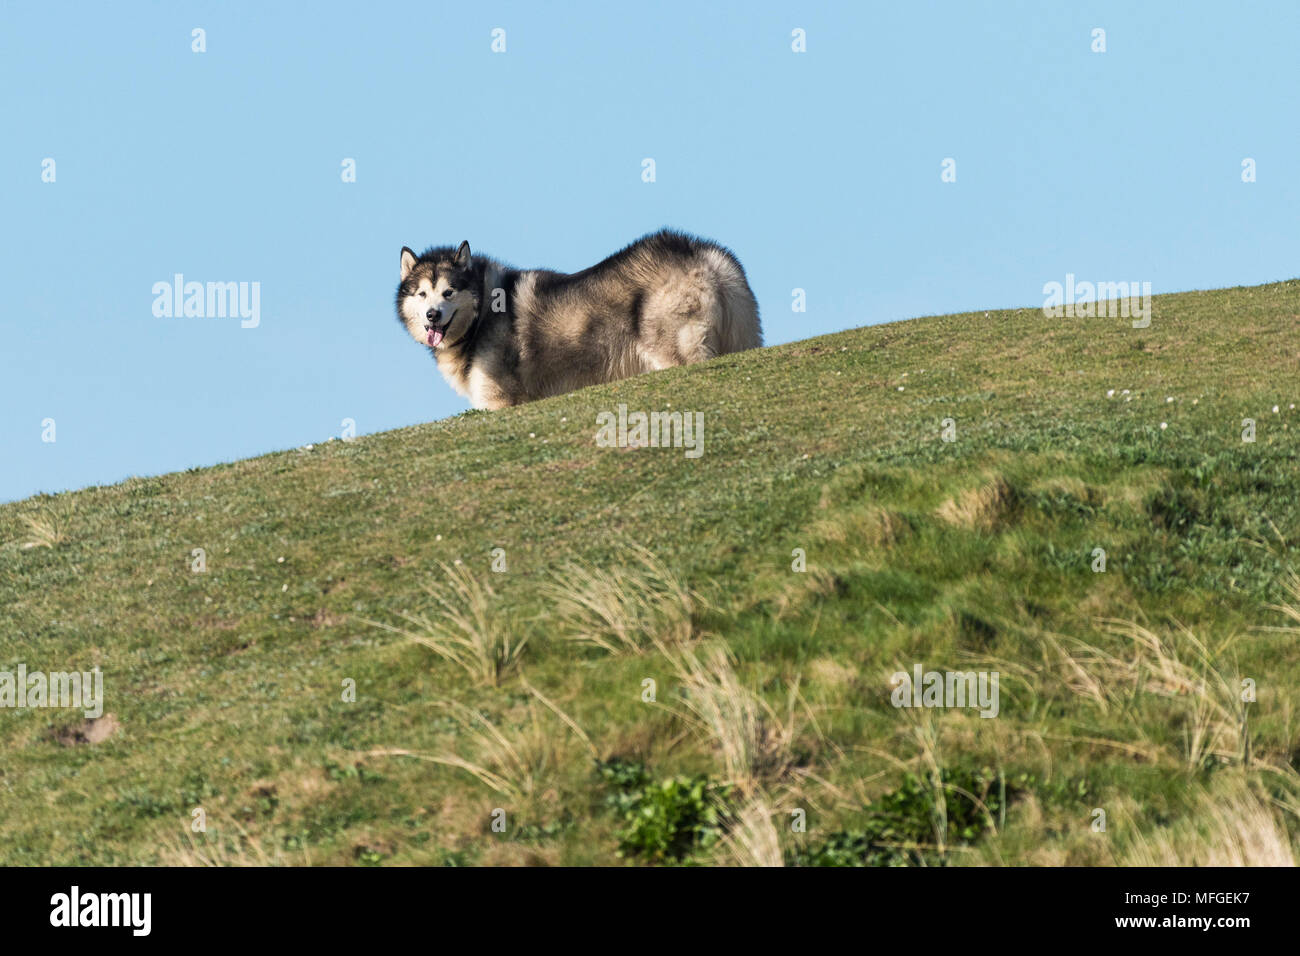 An Alaskan Malamute Canis lupus familiaris standing on a small hill. Stock Photo